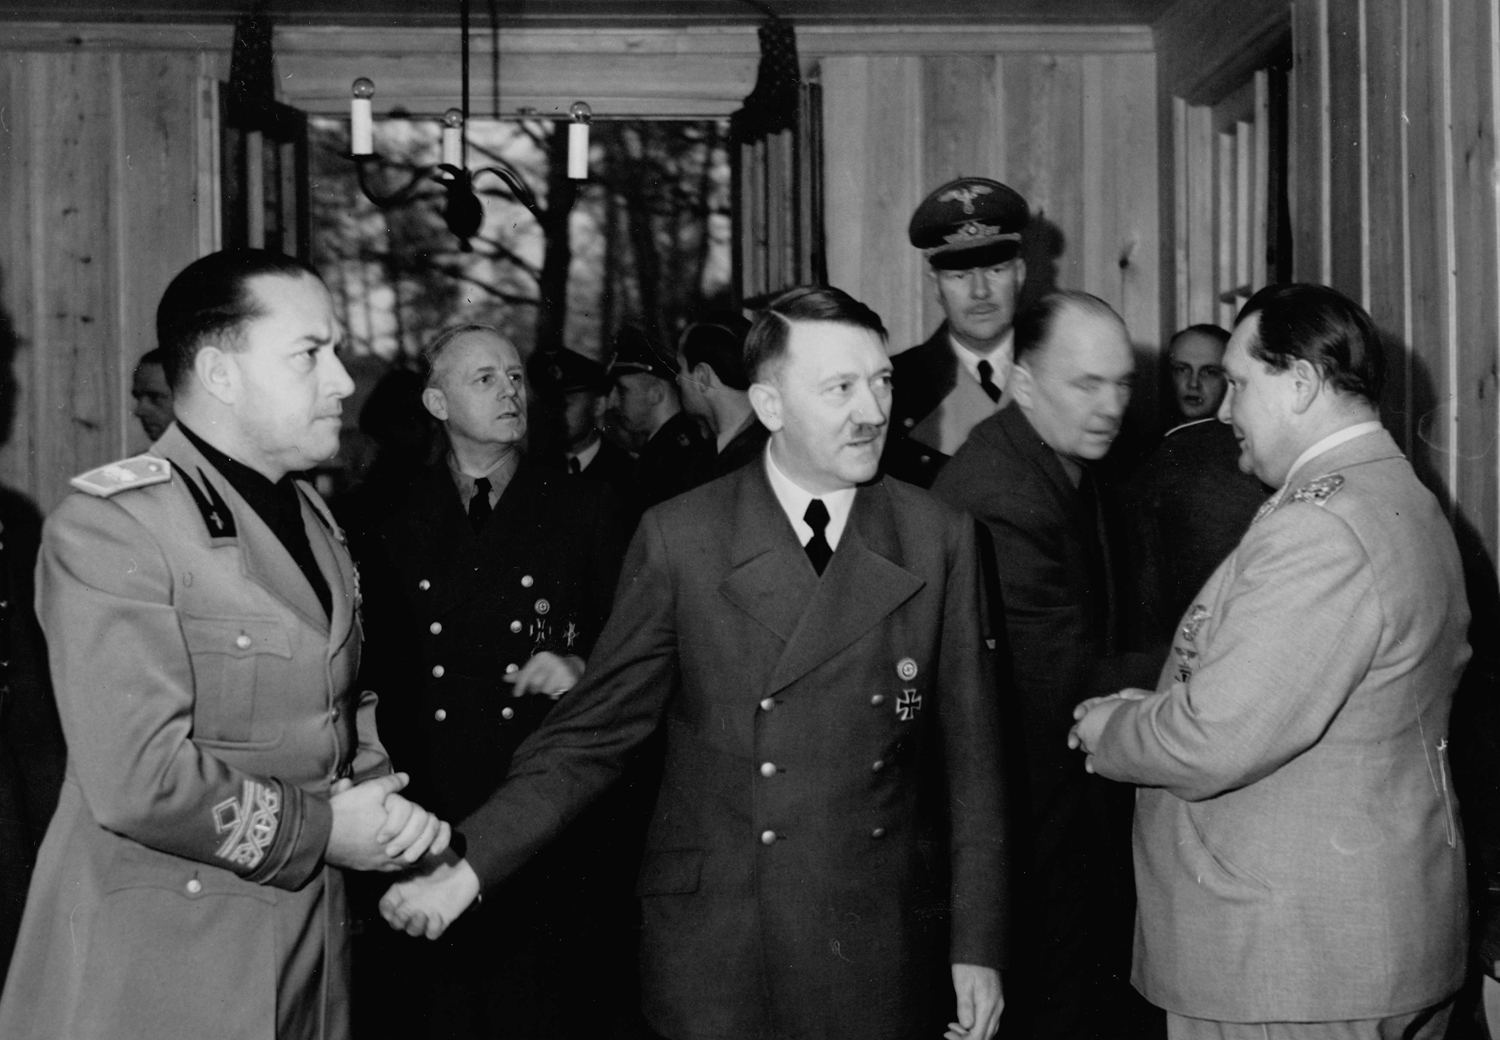 Adolf Hitler meets Italian foreign affairs minister Galeazzo Ciano at the Wolfsschanze